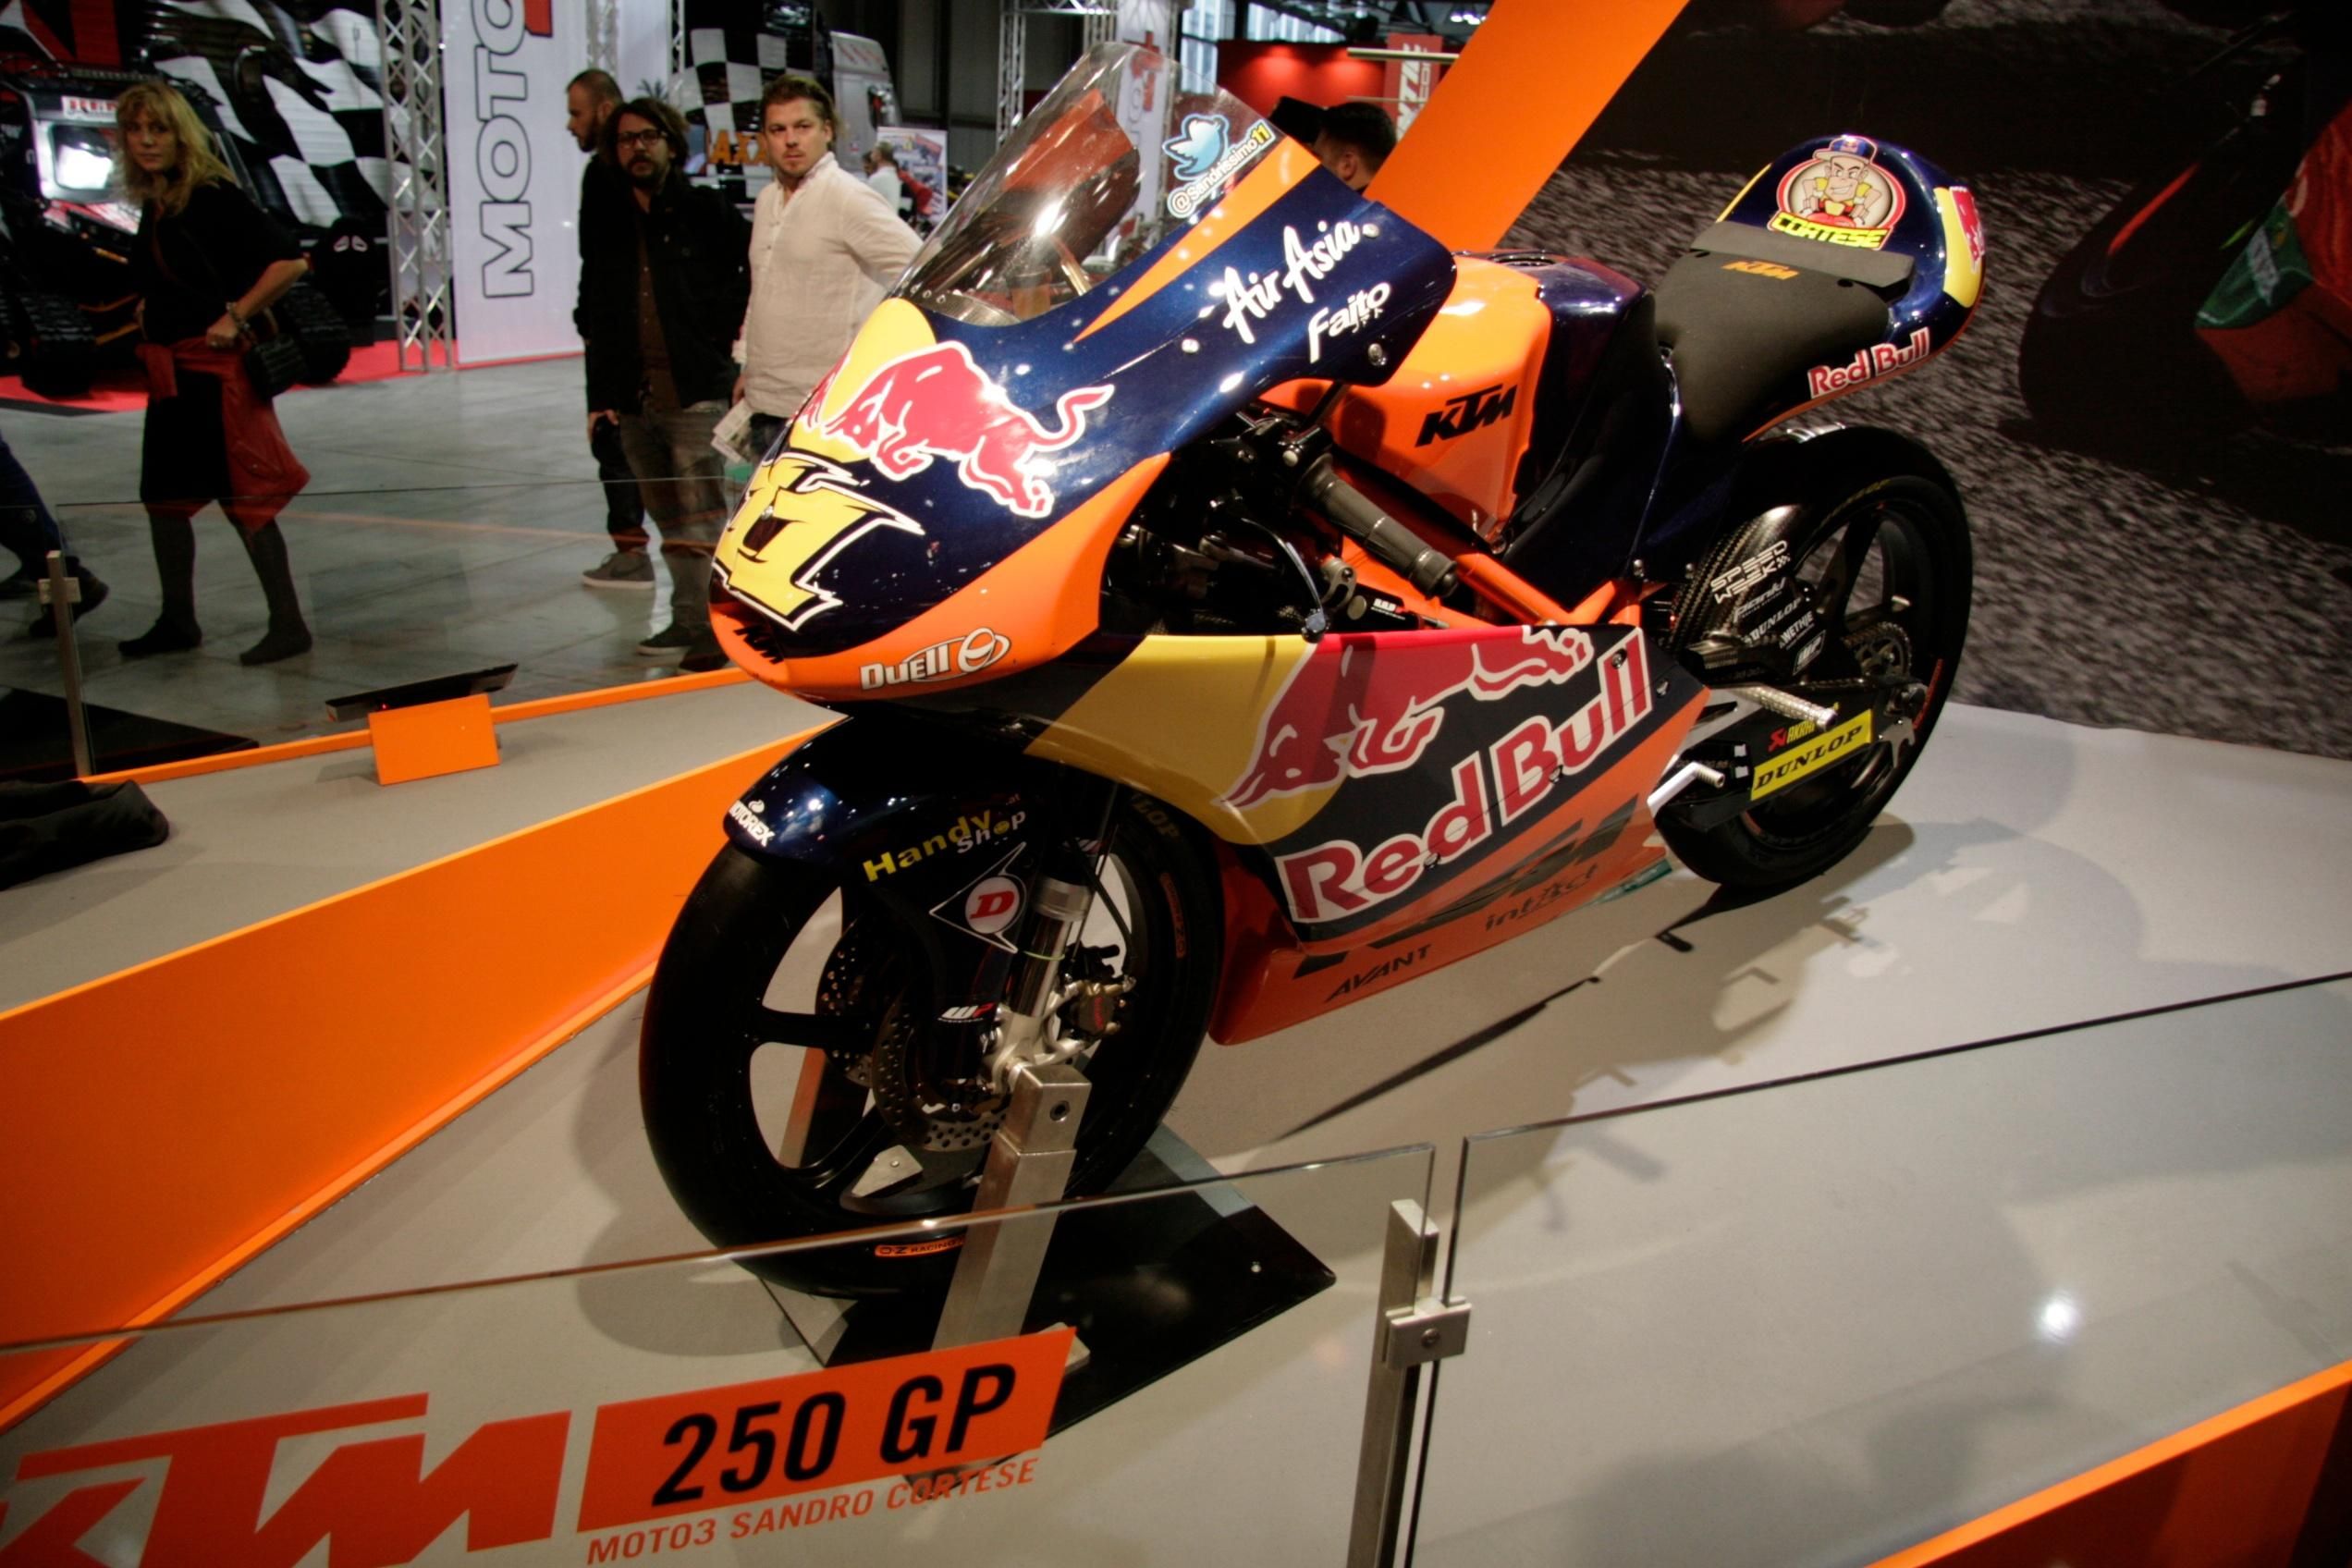 Sandro Cortese's Moto3 winning bike will be released to the public as the 250R